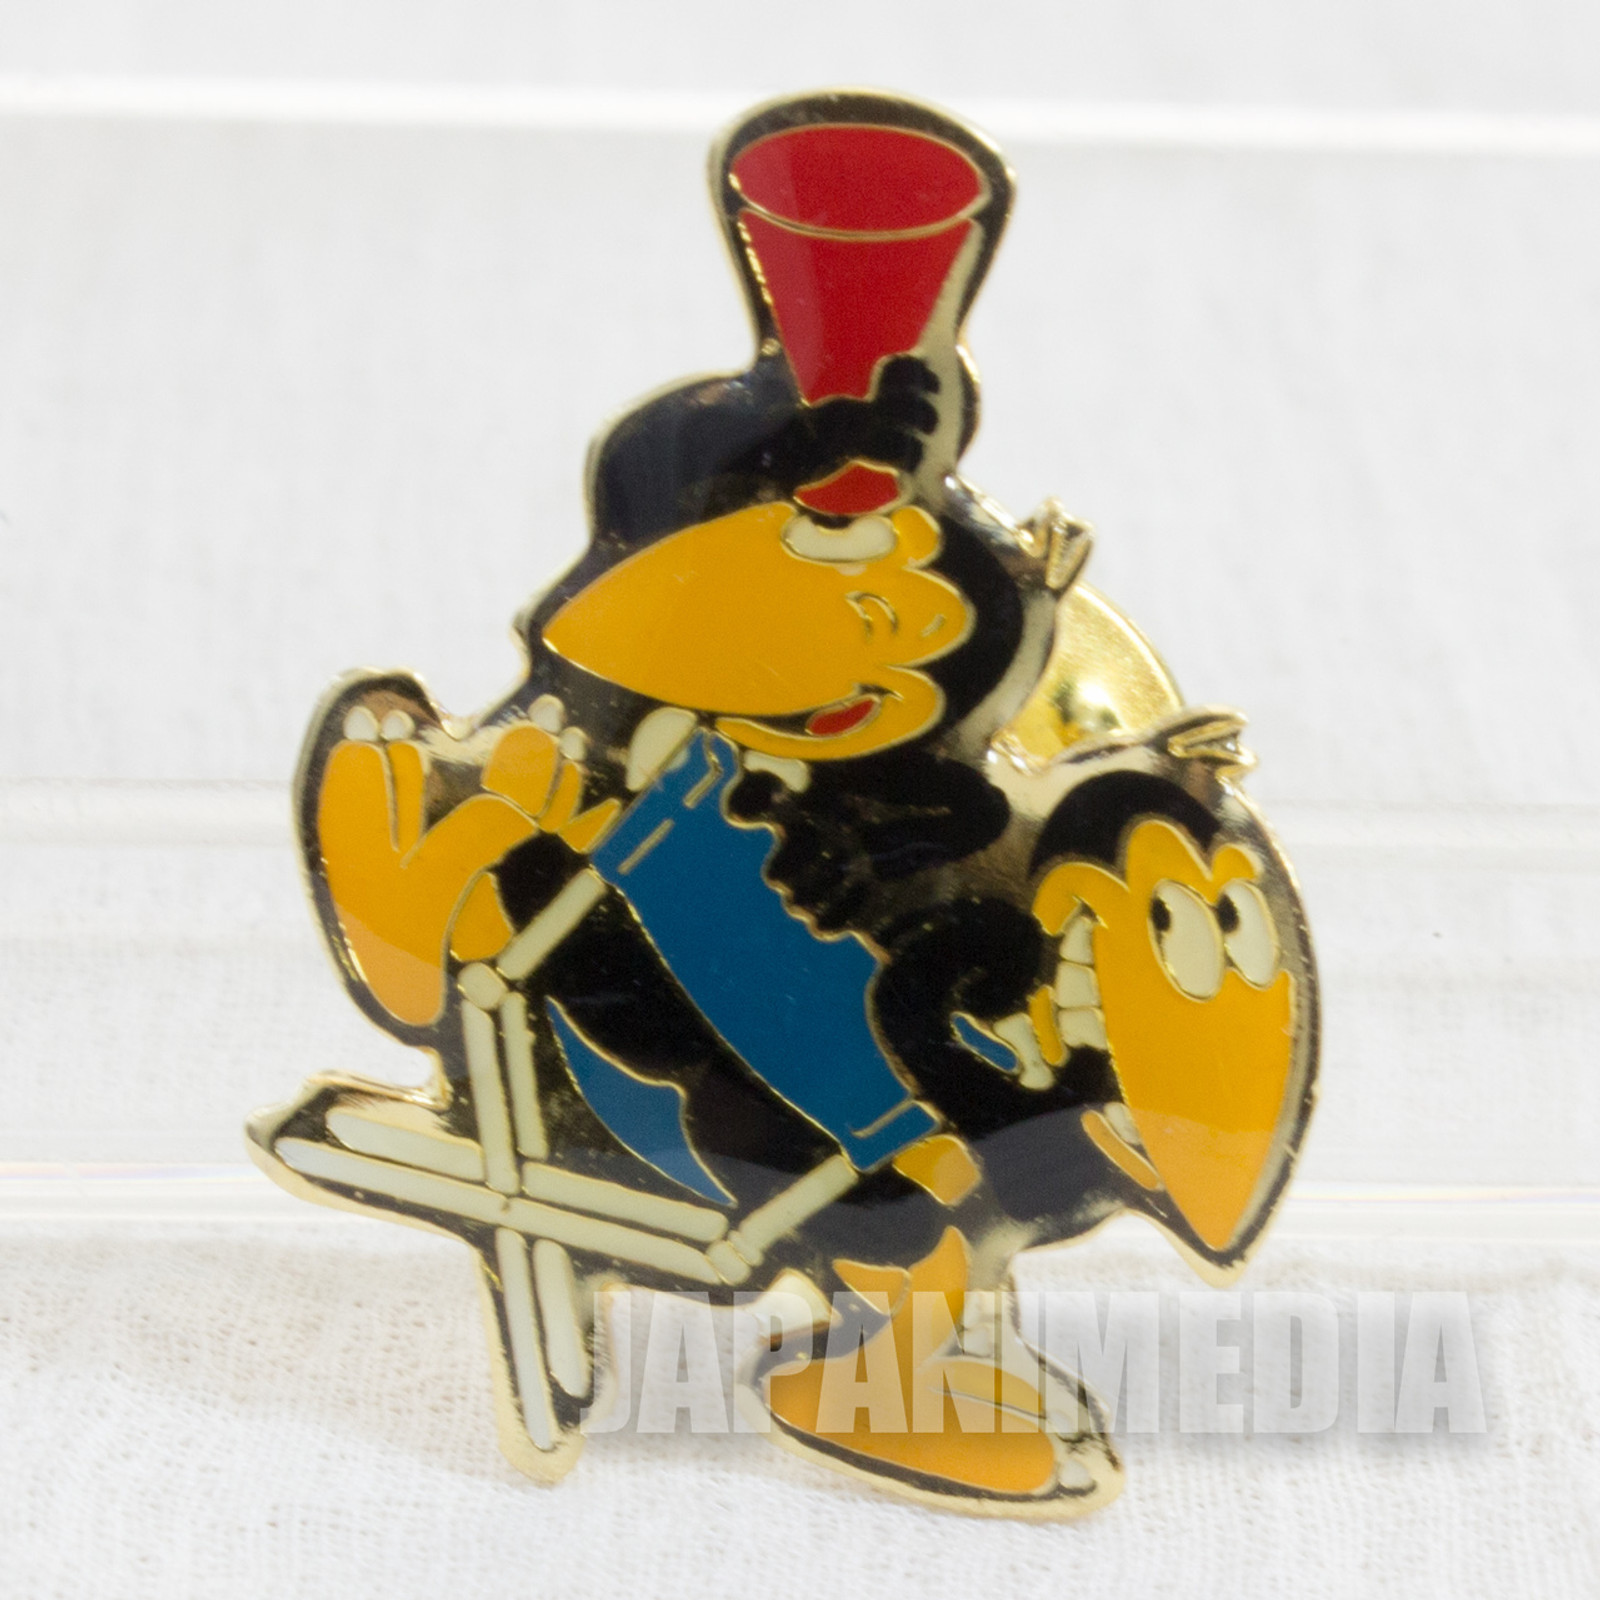 Heckle and Jeckle PINS #2 ANIME